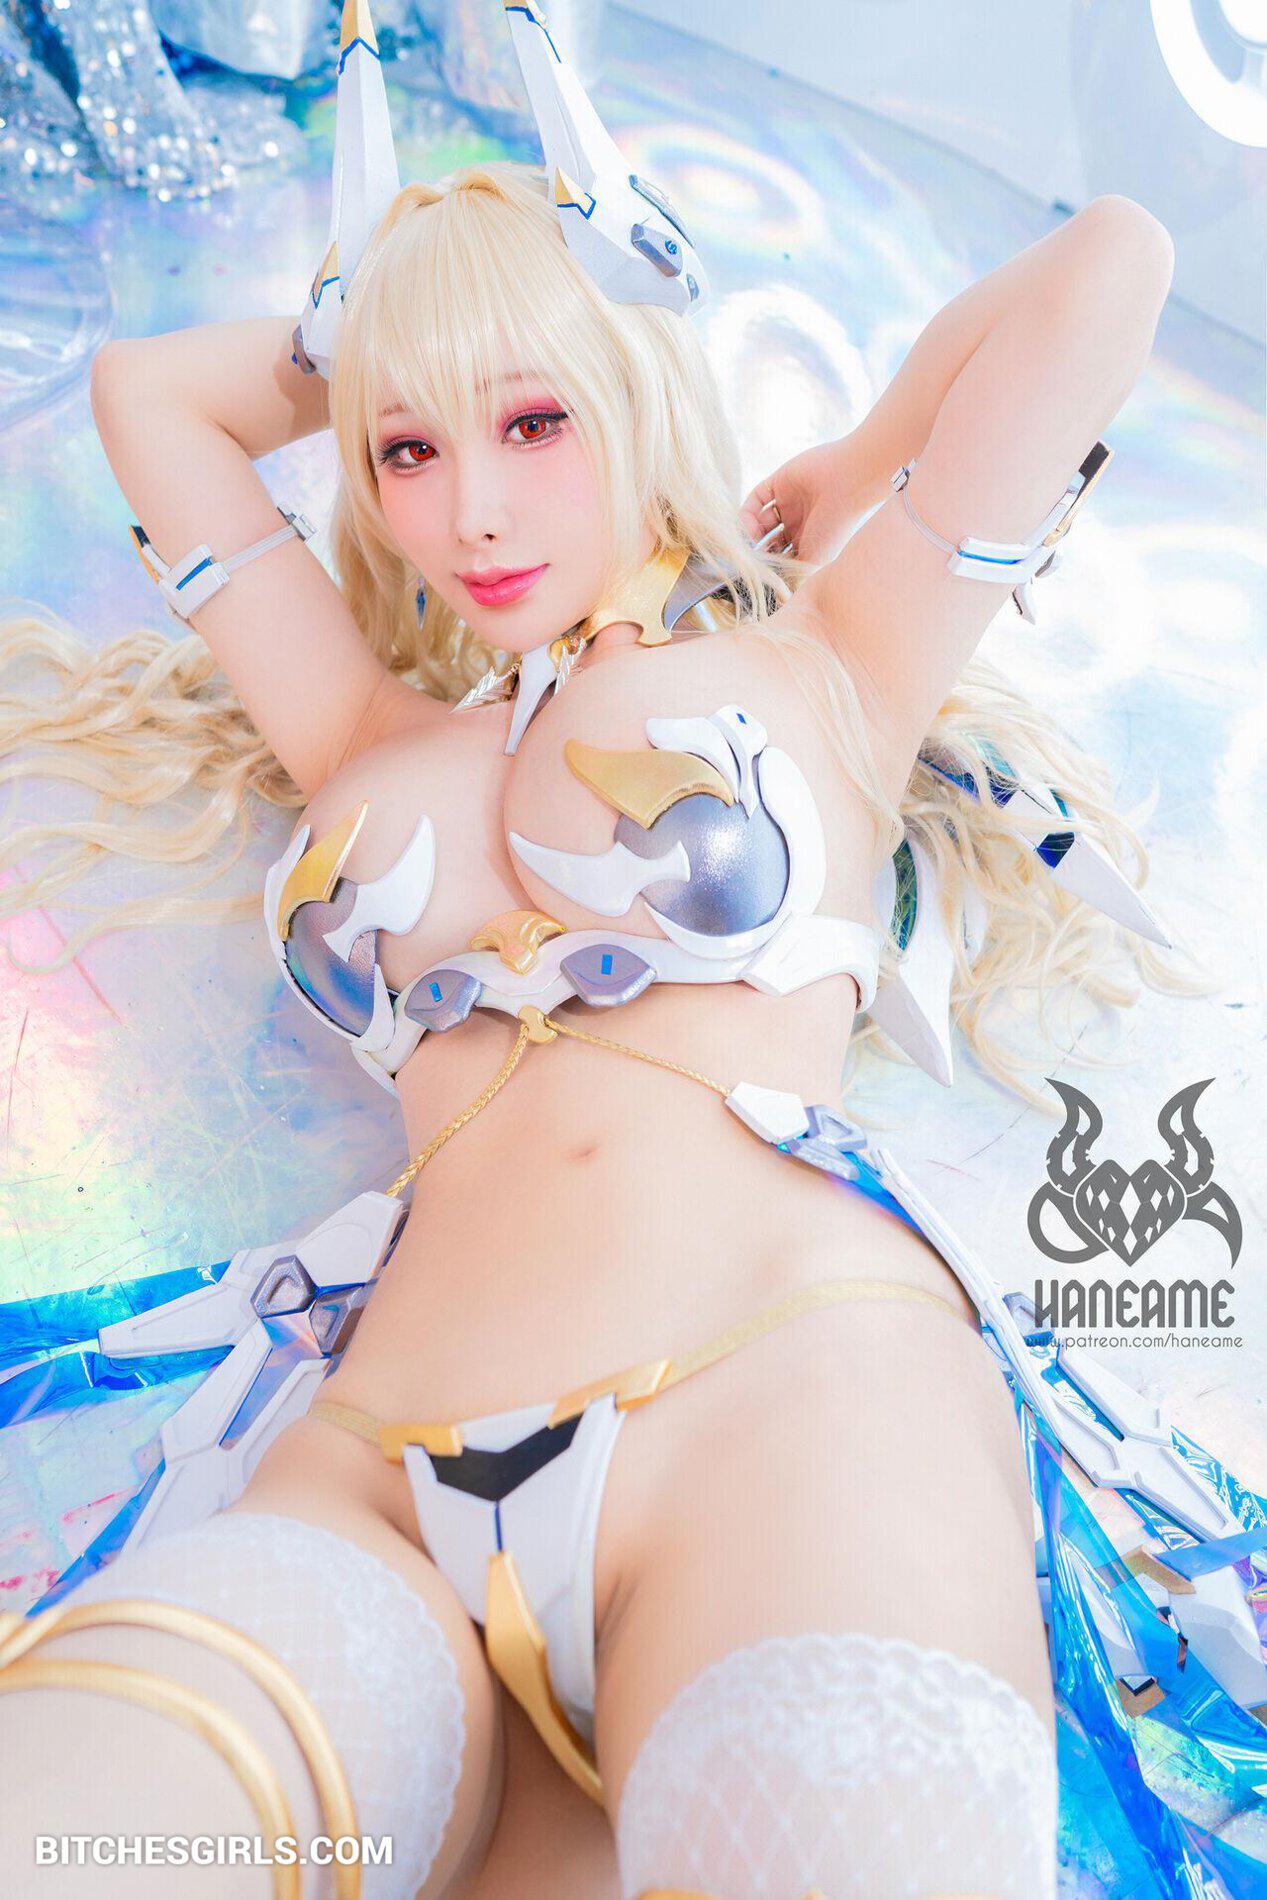 Hane Ame Cosplay Porn - Asian Patreon Leaked Nudes